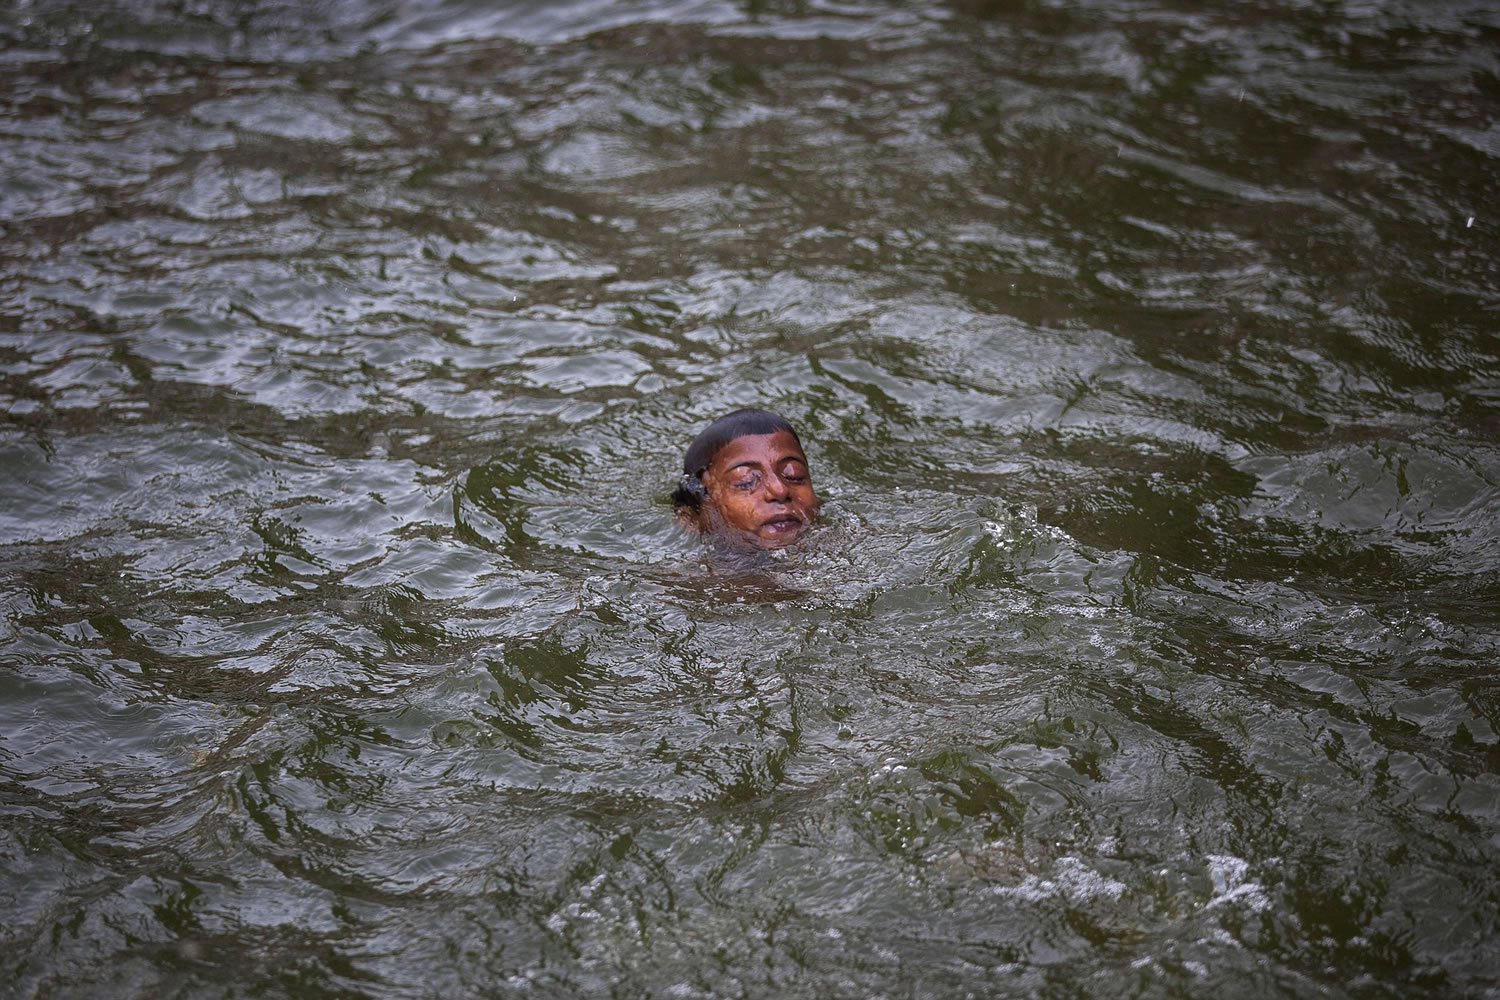 An Indian boy swims in a water body on a hot summer day in New Delhi, India, Tuesday, May 26, 2015. Delhi recorded a maximum temperature of 46 degrees Celsius on Tuesday. In southern India, more than 750 people have died since the middle of April as soaring summer temperatures scorch the country, officials said Tuesday.